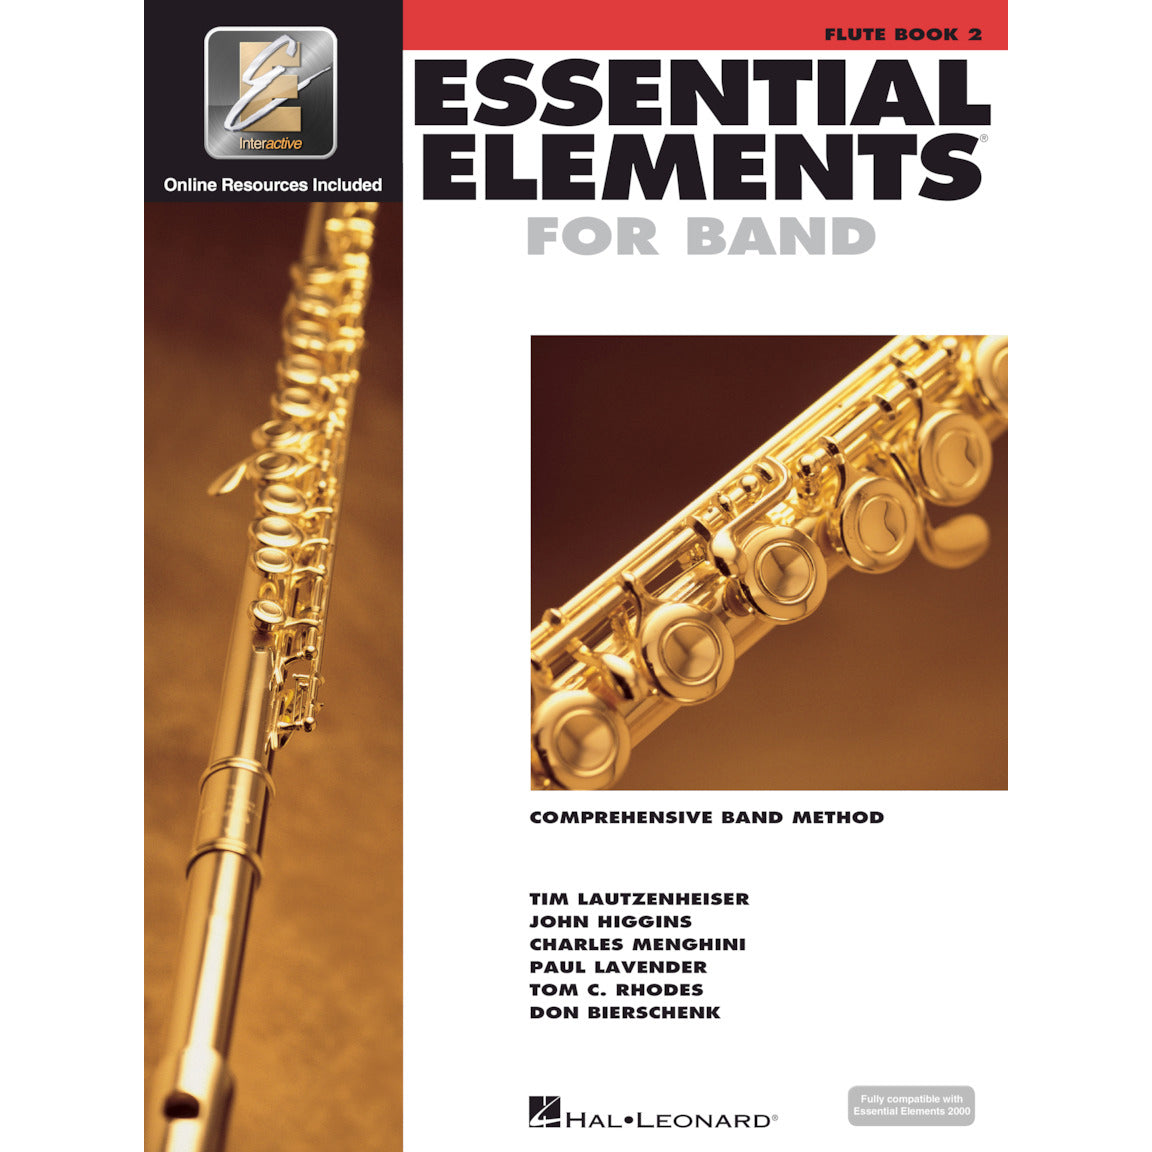 Essential Elements for Band Flute Book 2